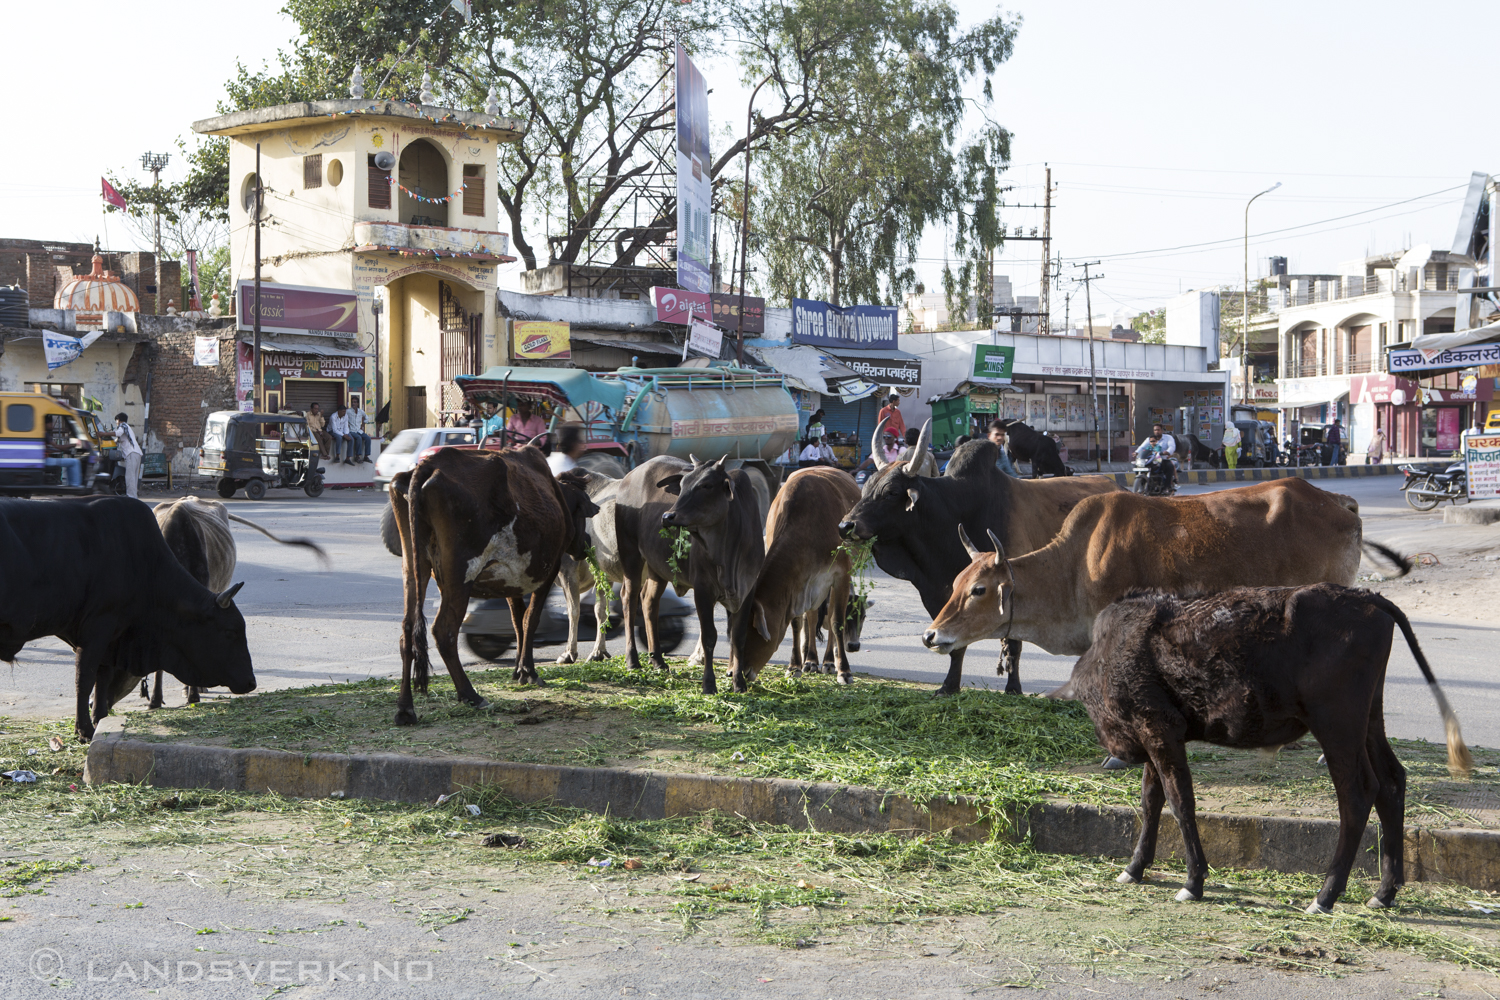 Holy cows! Udaipur, India. 

(Canon EOS 5D Mark III / Canon EF 24-70mm f/2.8 L USM)